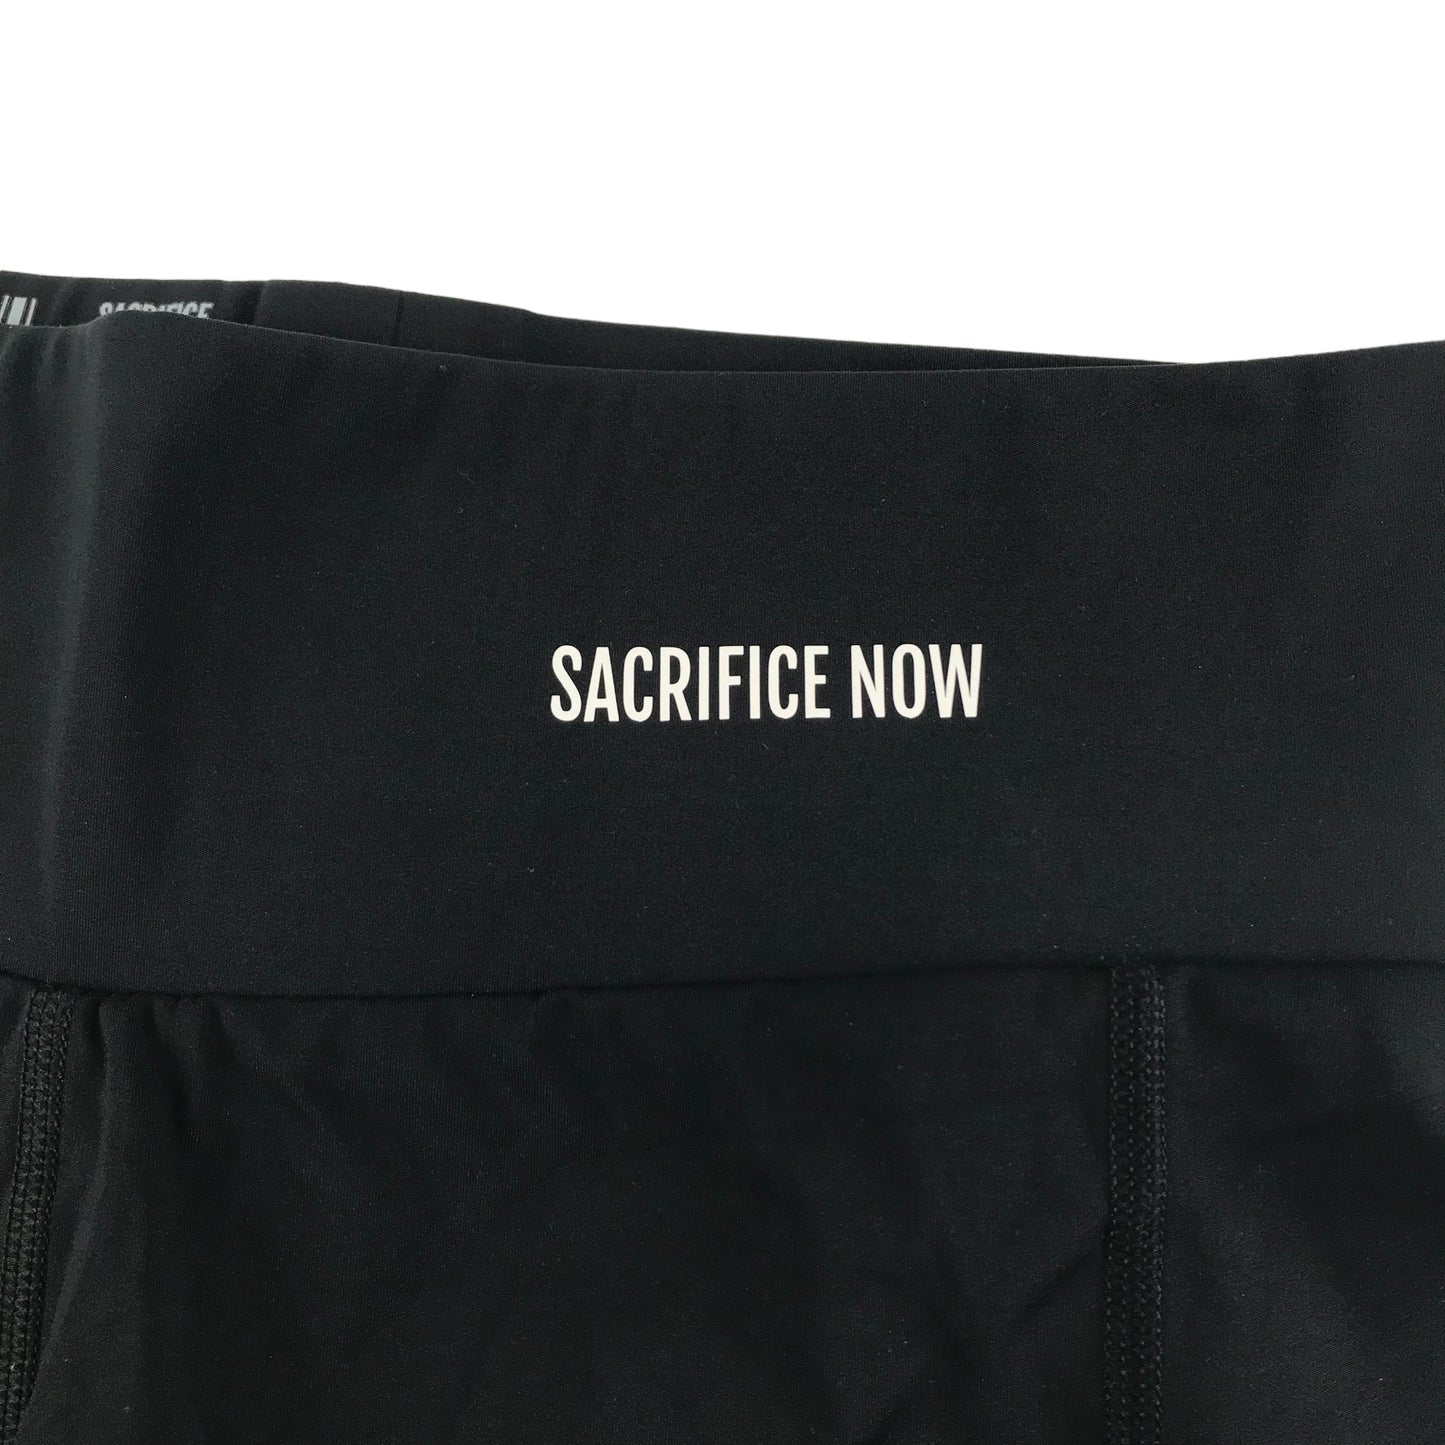 Sacrifice Now Sport Shorts Size Women's L Black Cycling Style Compression with Pockets